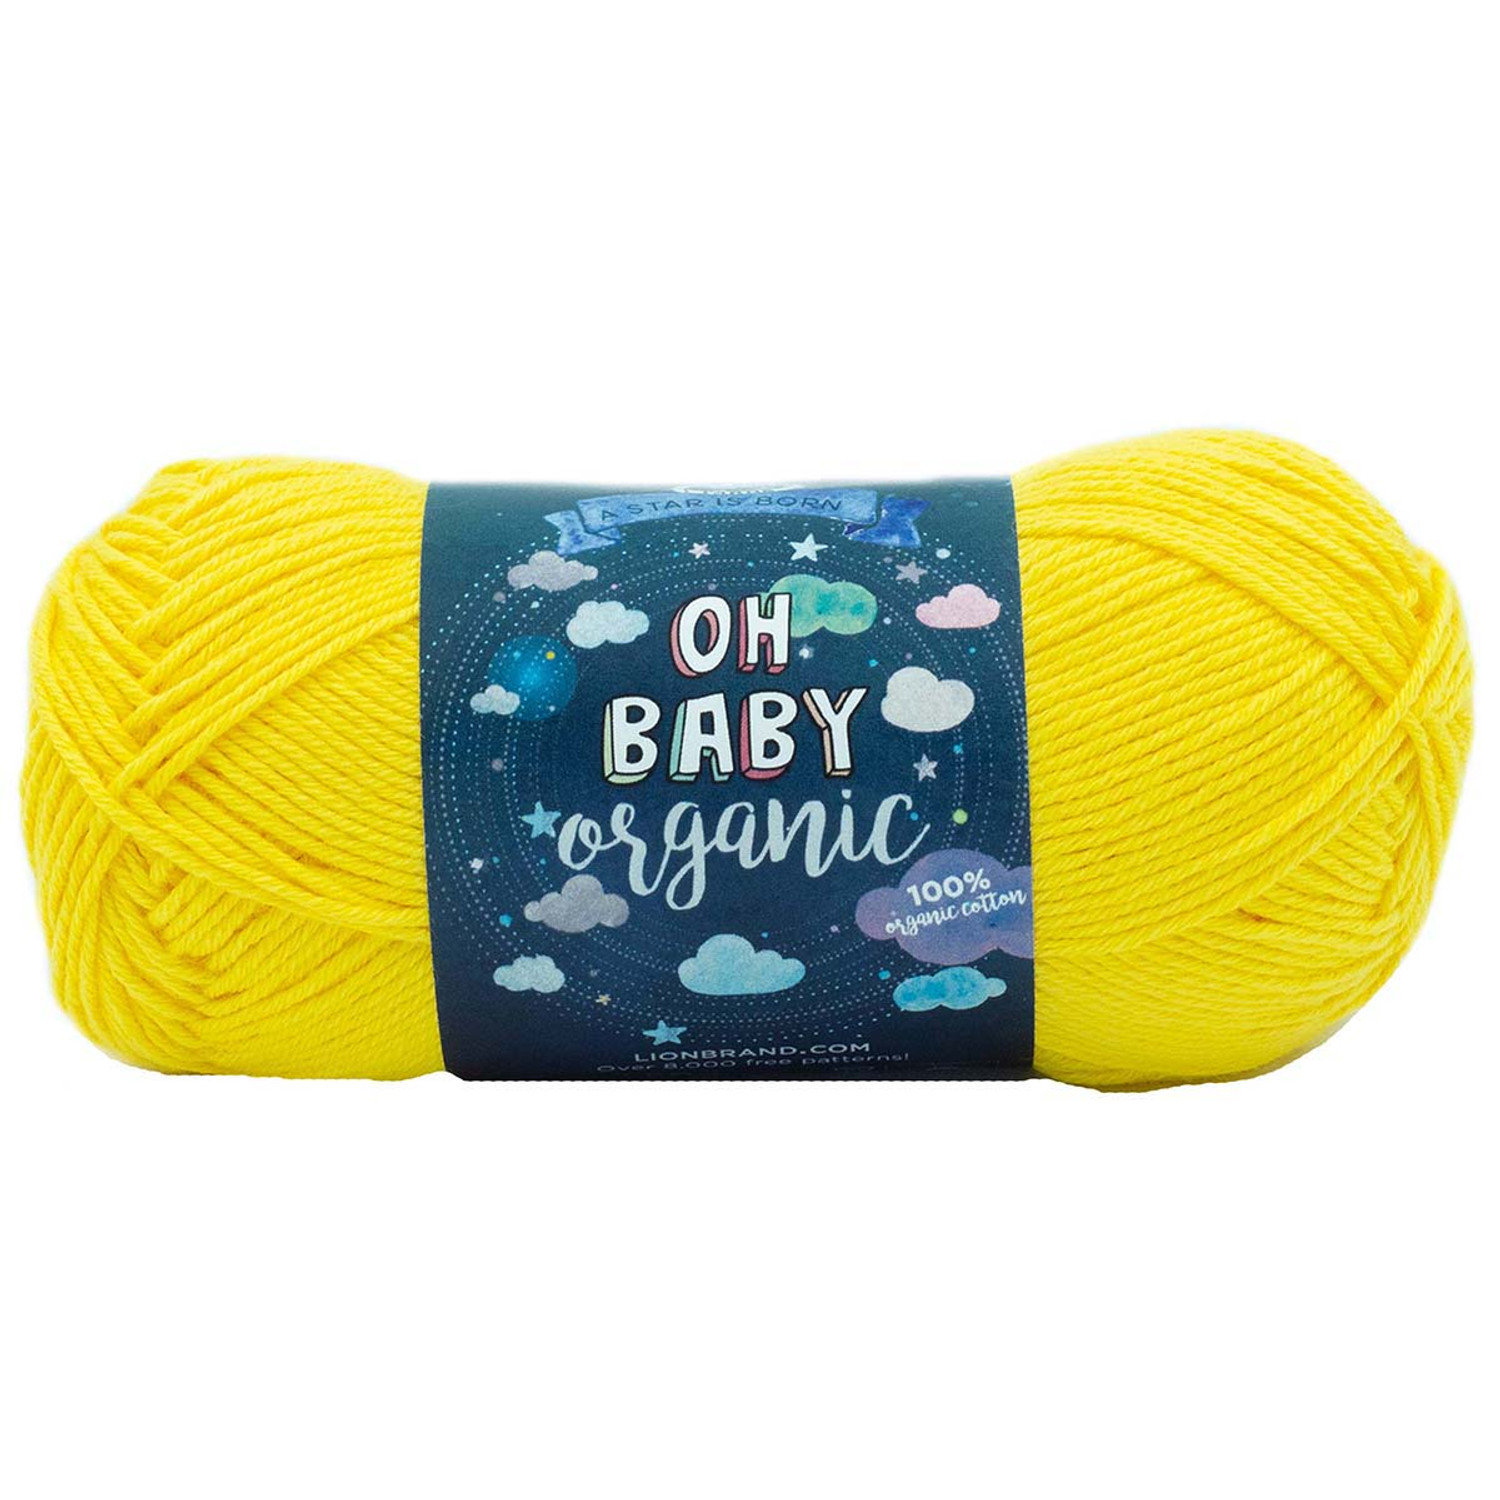 (3 Pack) Lion Brand Yarn 173-106 Oh Baby Yarn, Turquoise